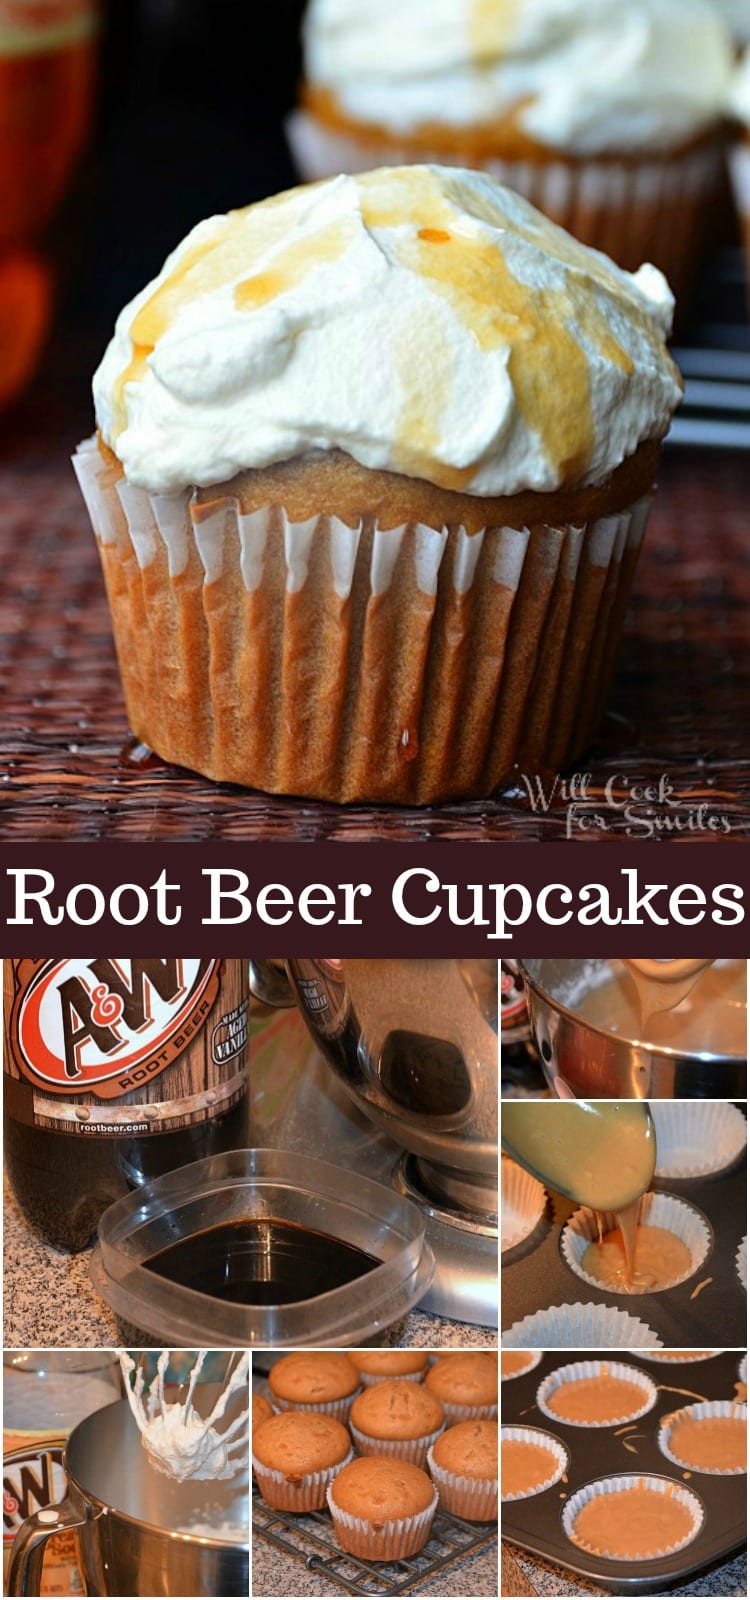 Root Beer Cupcakes with Cream Soda Frosting collage